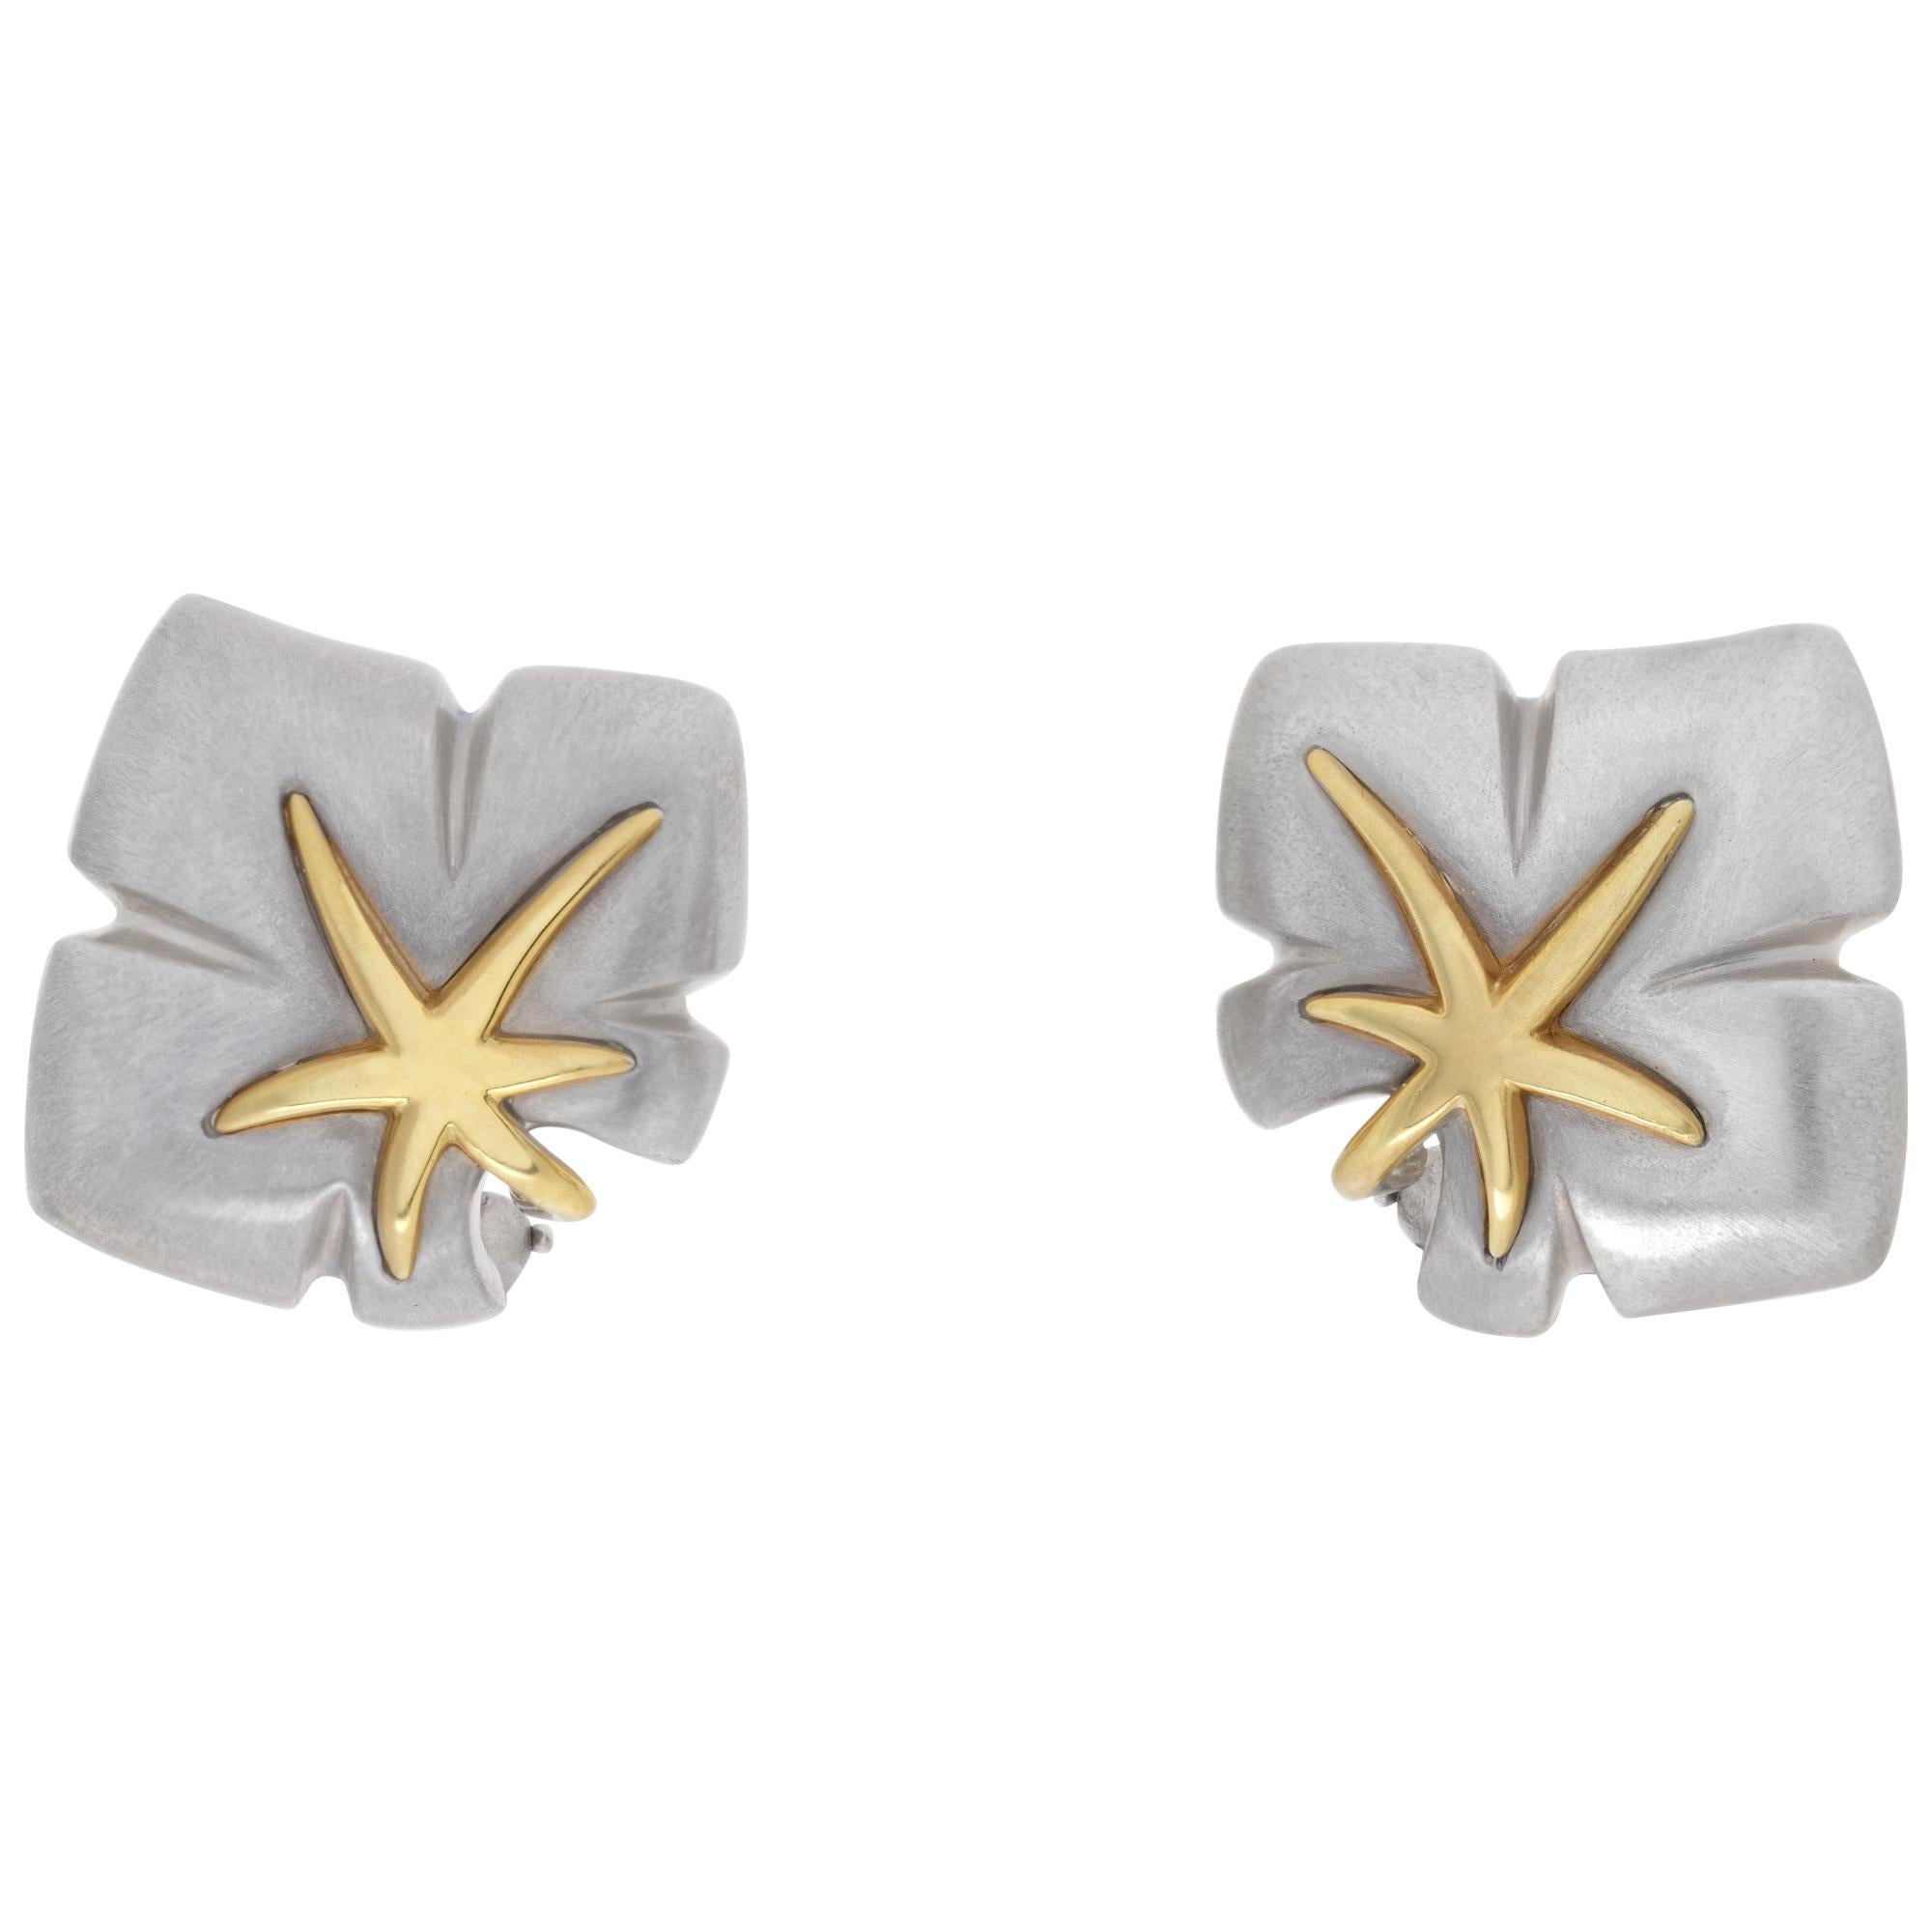 Earrings with 18k Yellow Gold Accents, Tiffany & Co. Silver Maple Leaf Design